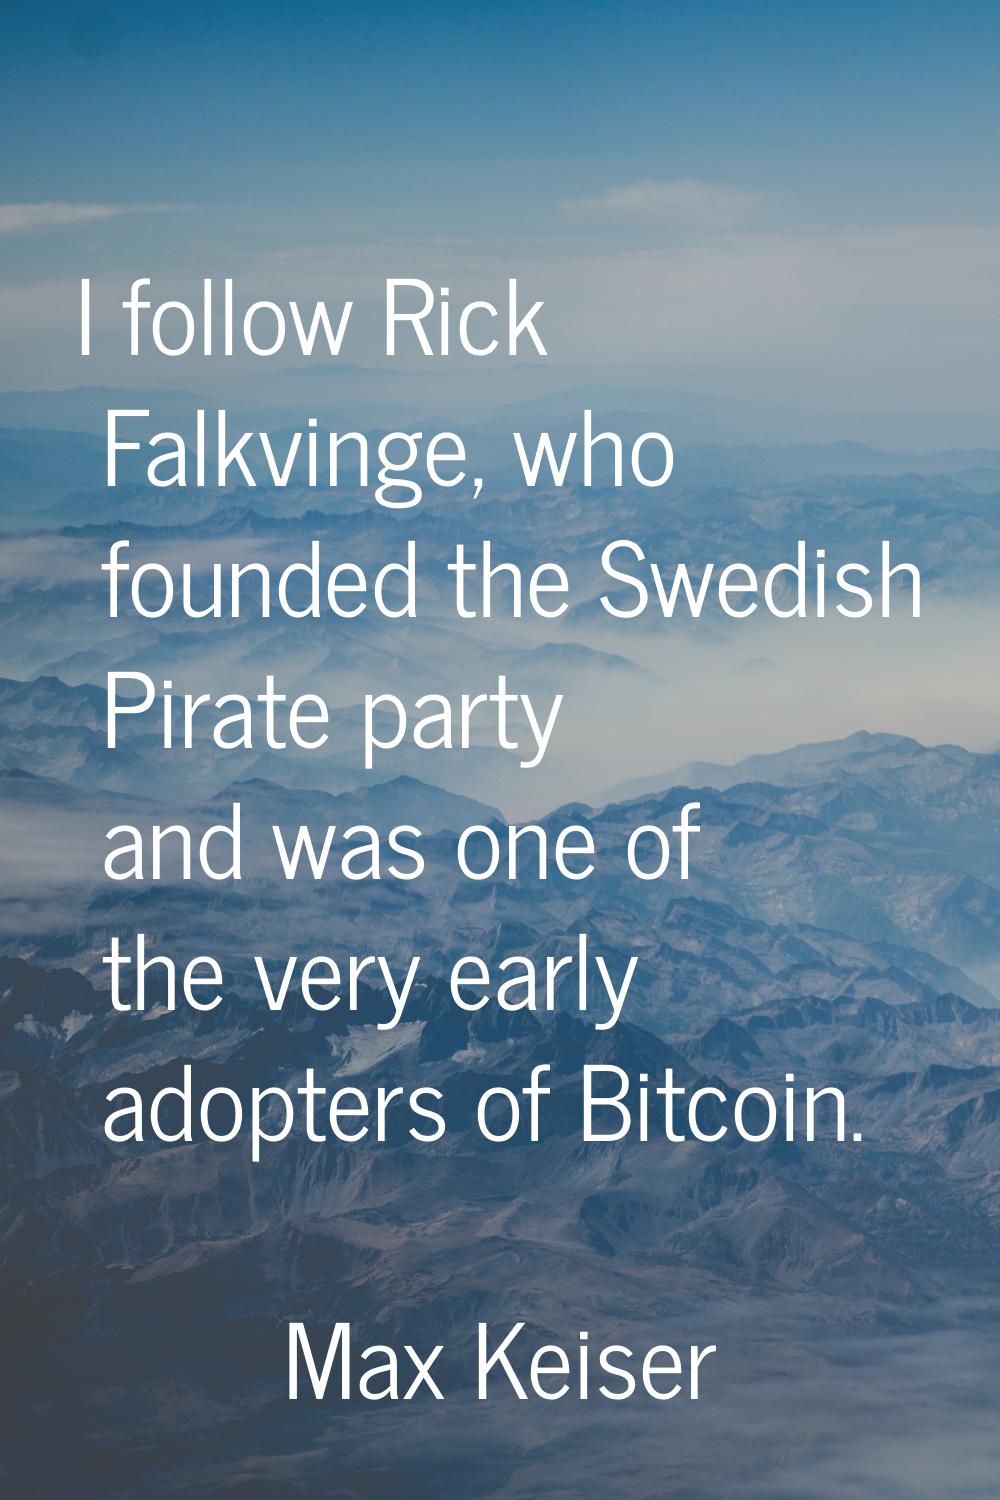 I follow Rick Falkvinge, who founded the Swedish Pirate party and was one of the very early adopter